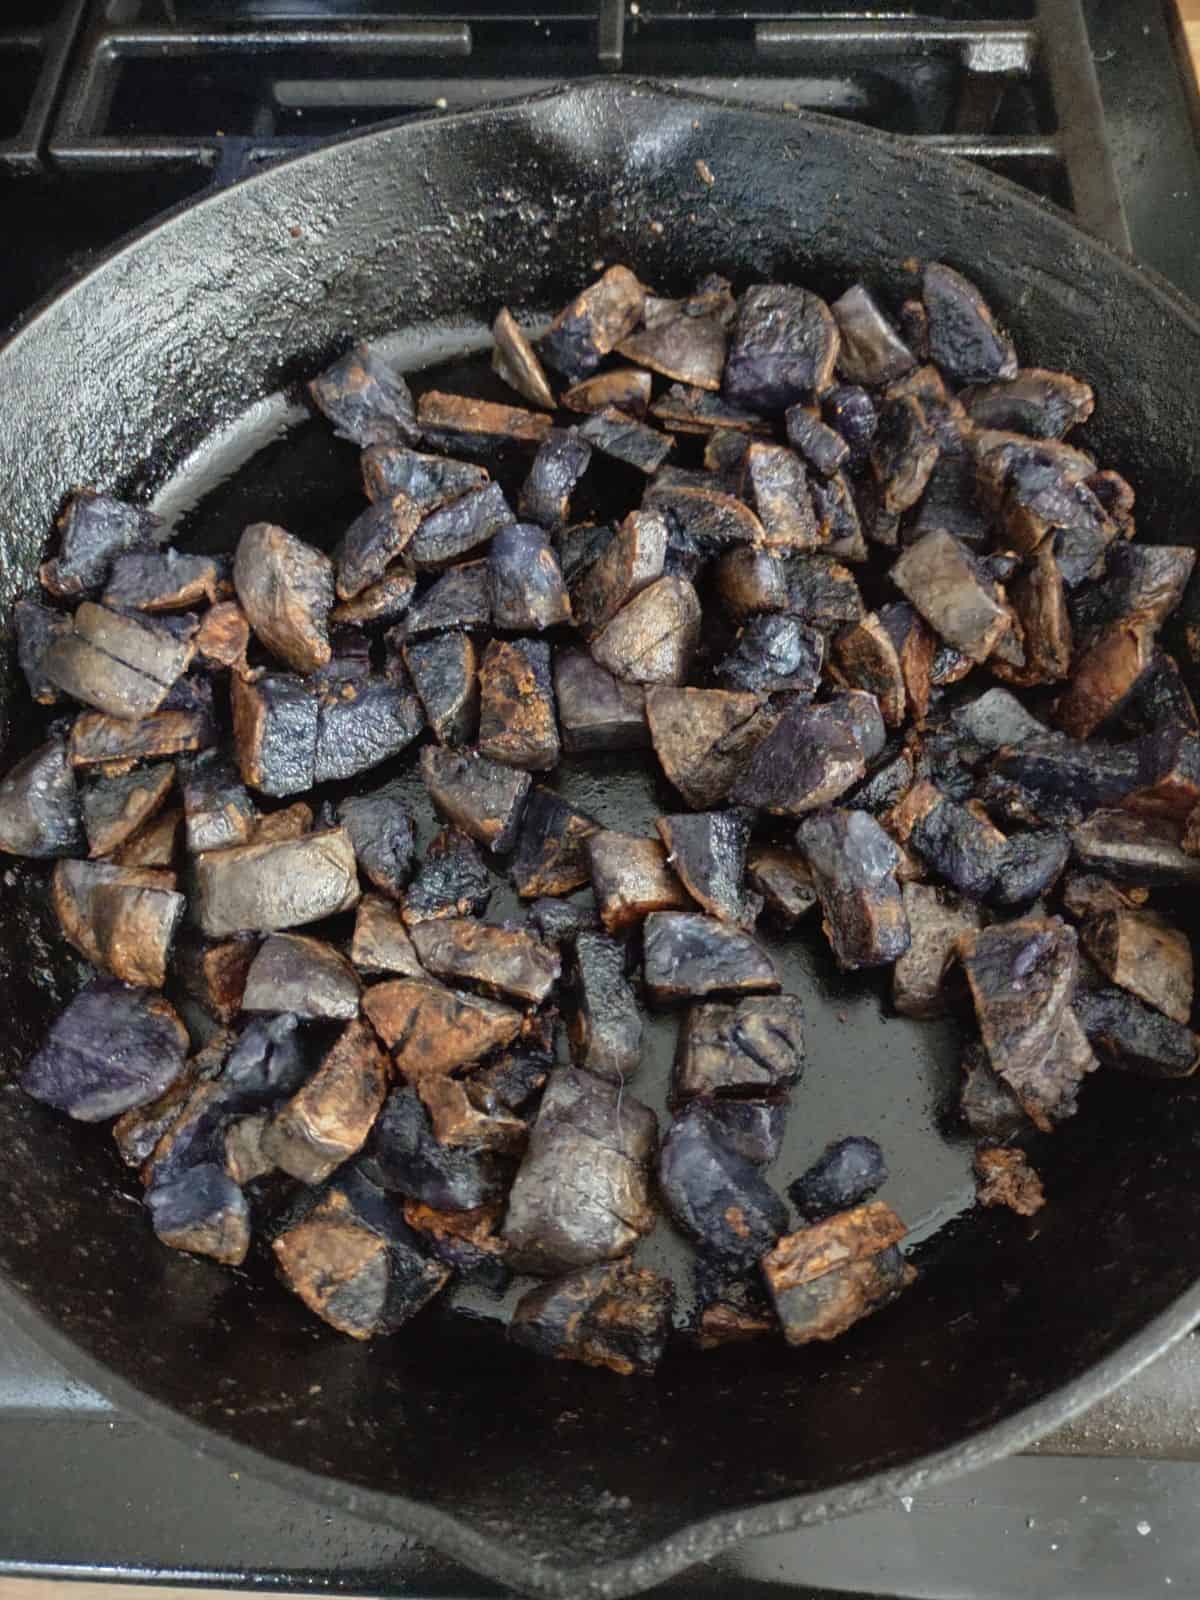 A cast iron skillet filled with purple potatoes that have been browned.